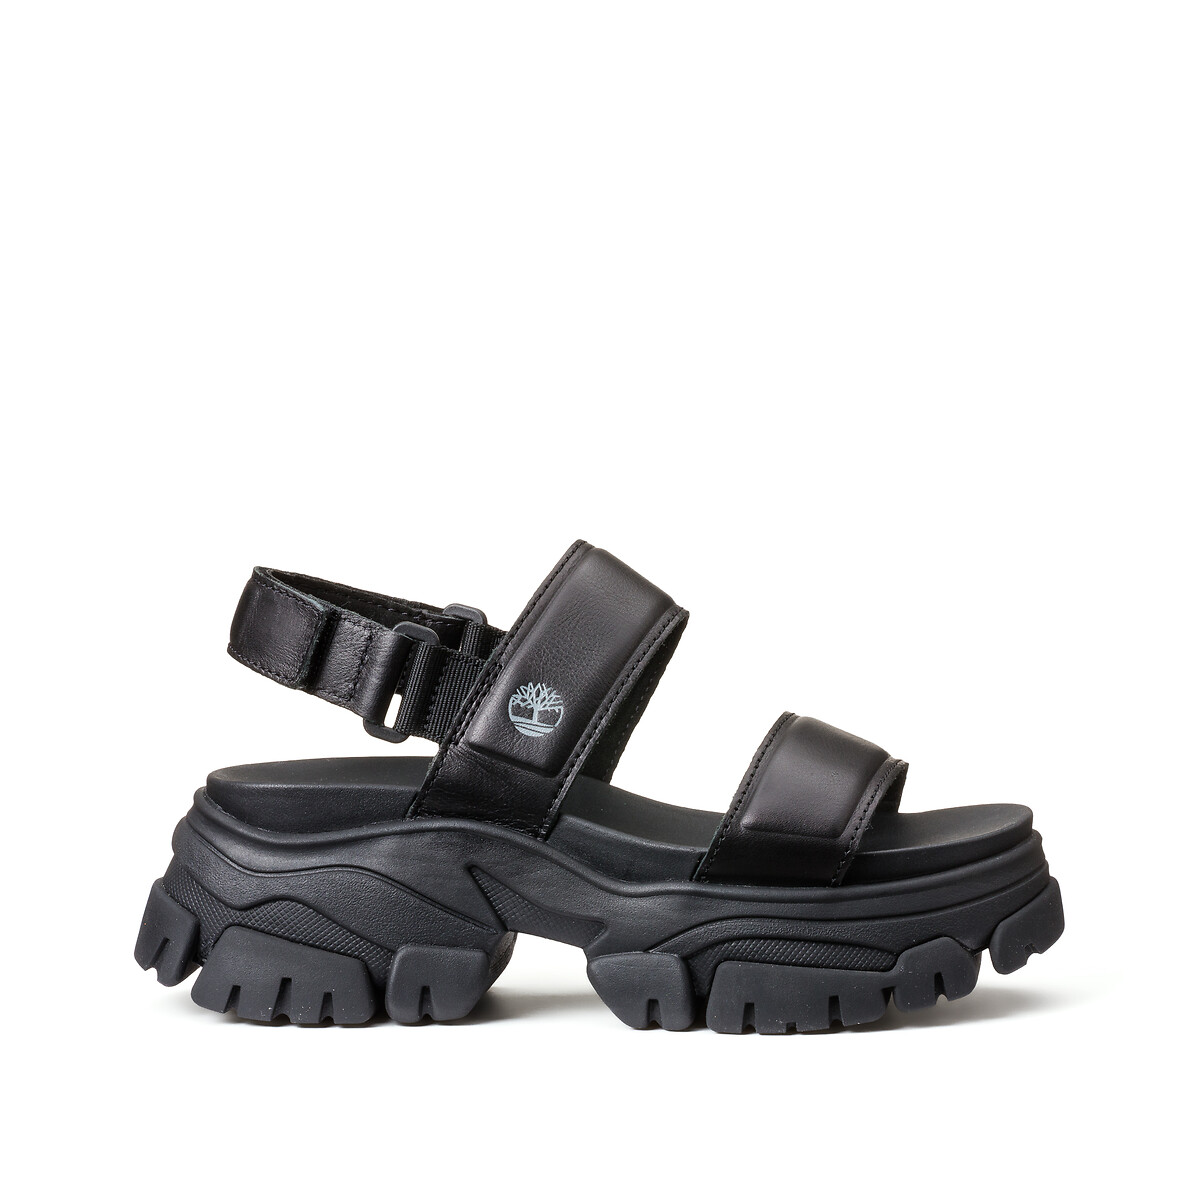 Image of Adley Way Sandal 2 Band Leather Sandals